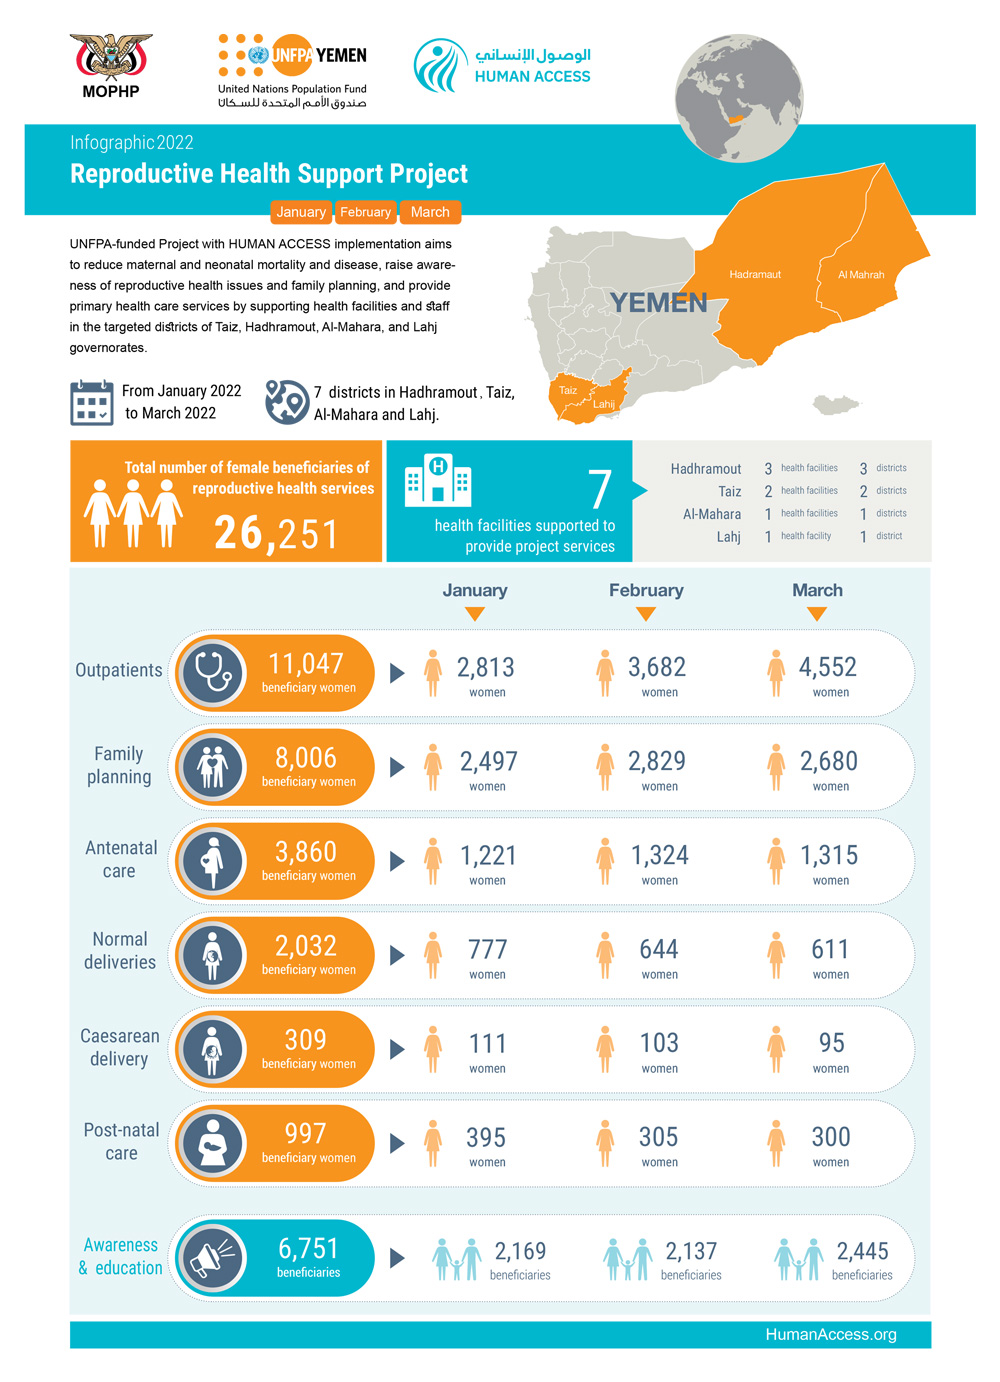 Infographic for Reproductive Health Support Project 2022 (January - February - March)